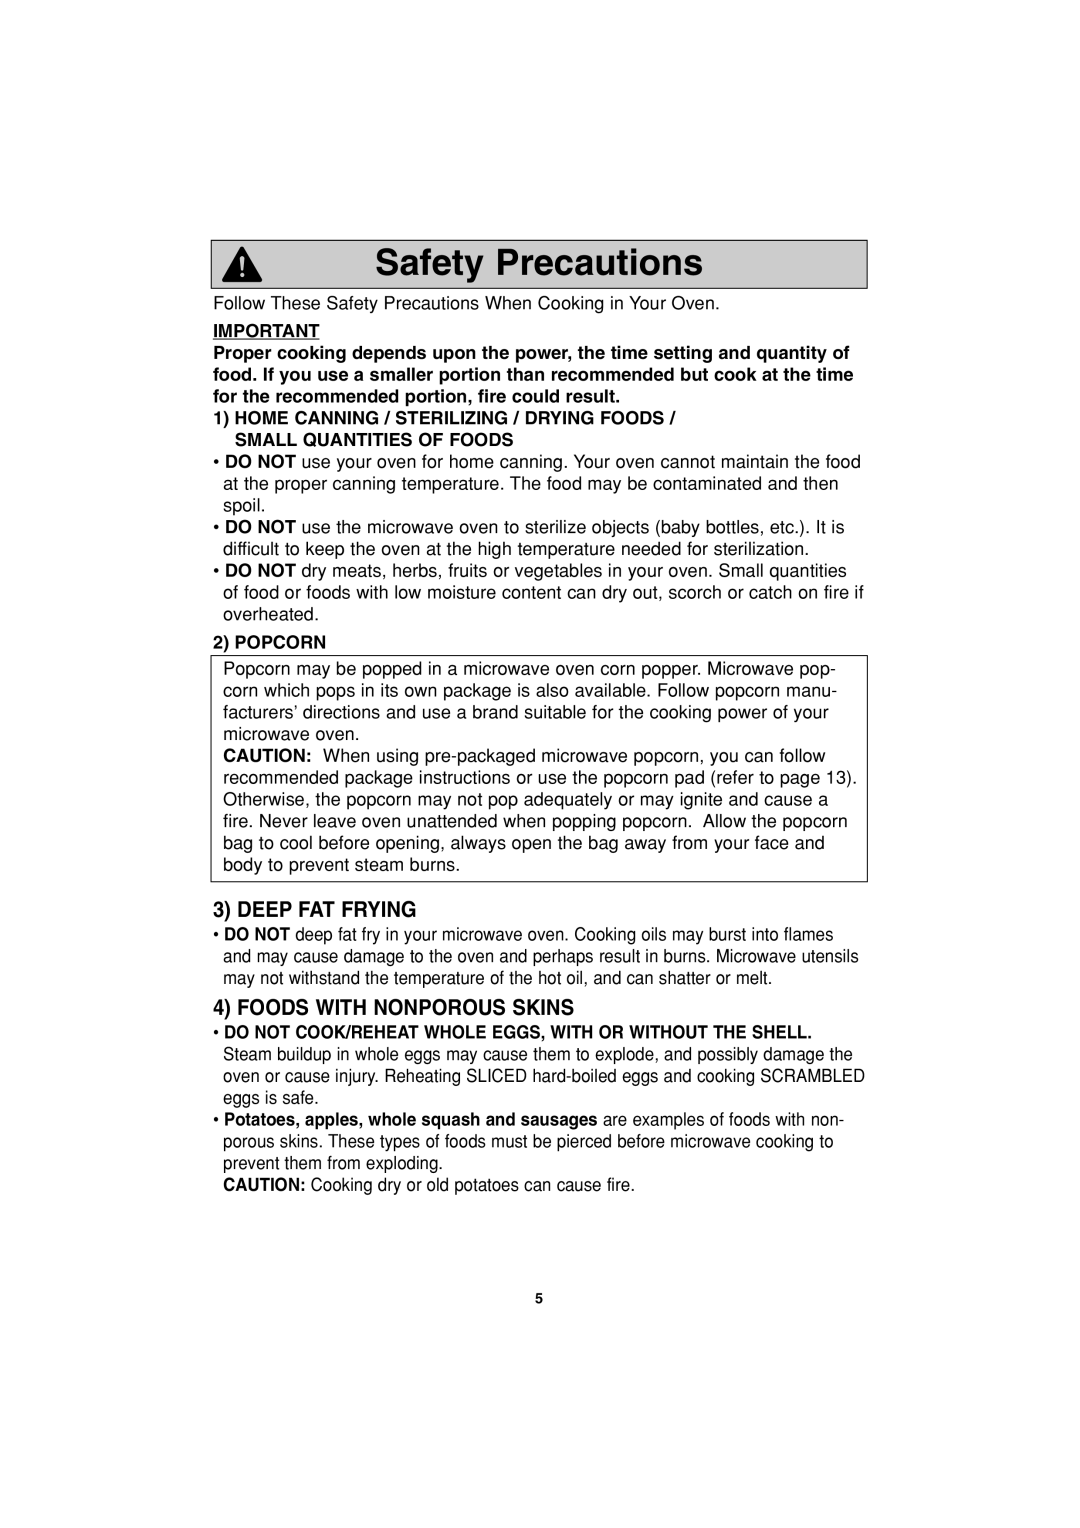 Panasonic NN-S943, NN-S743, NN-S533 Safety Precautions, Deep Fat Frying, Foods With Nonporous Skins 